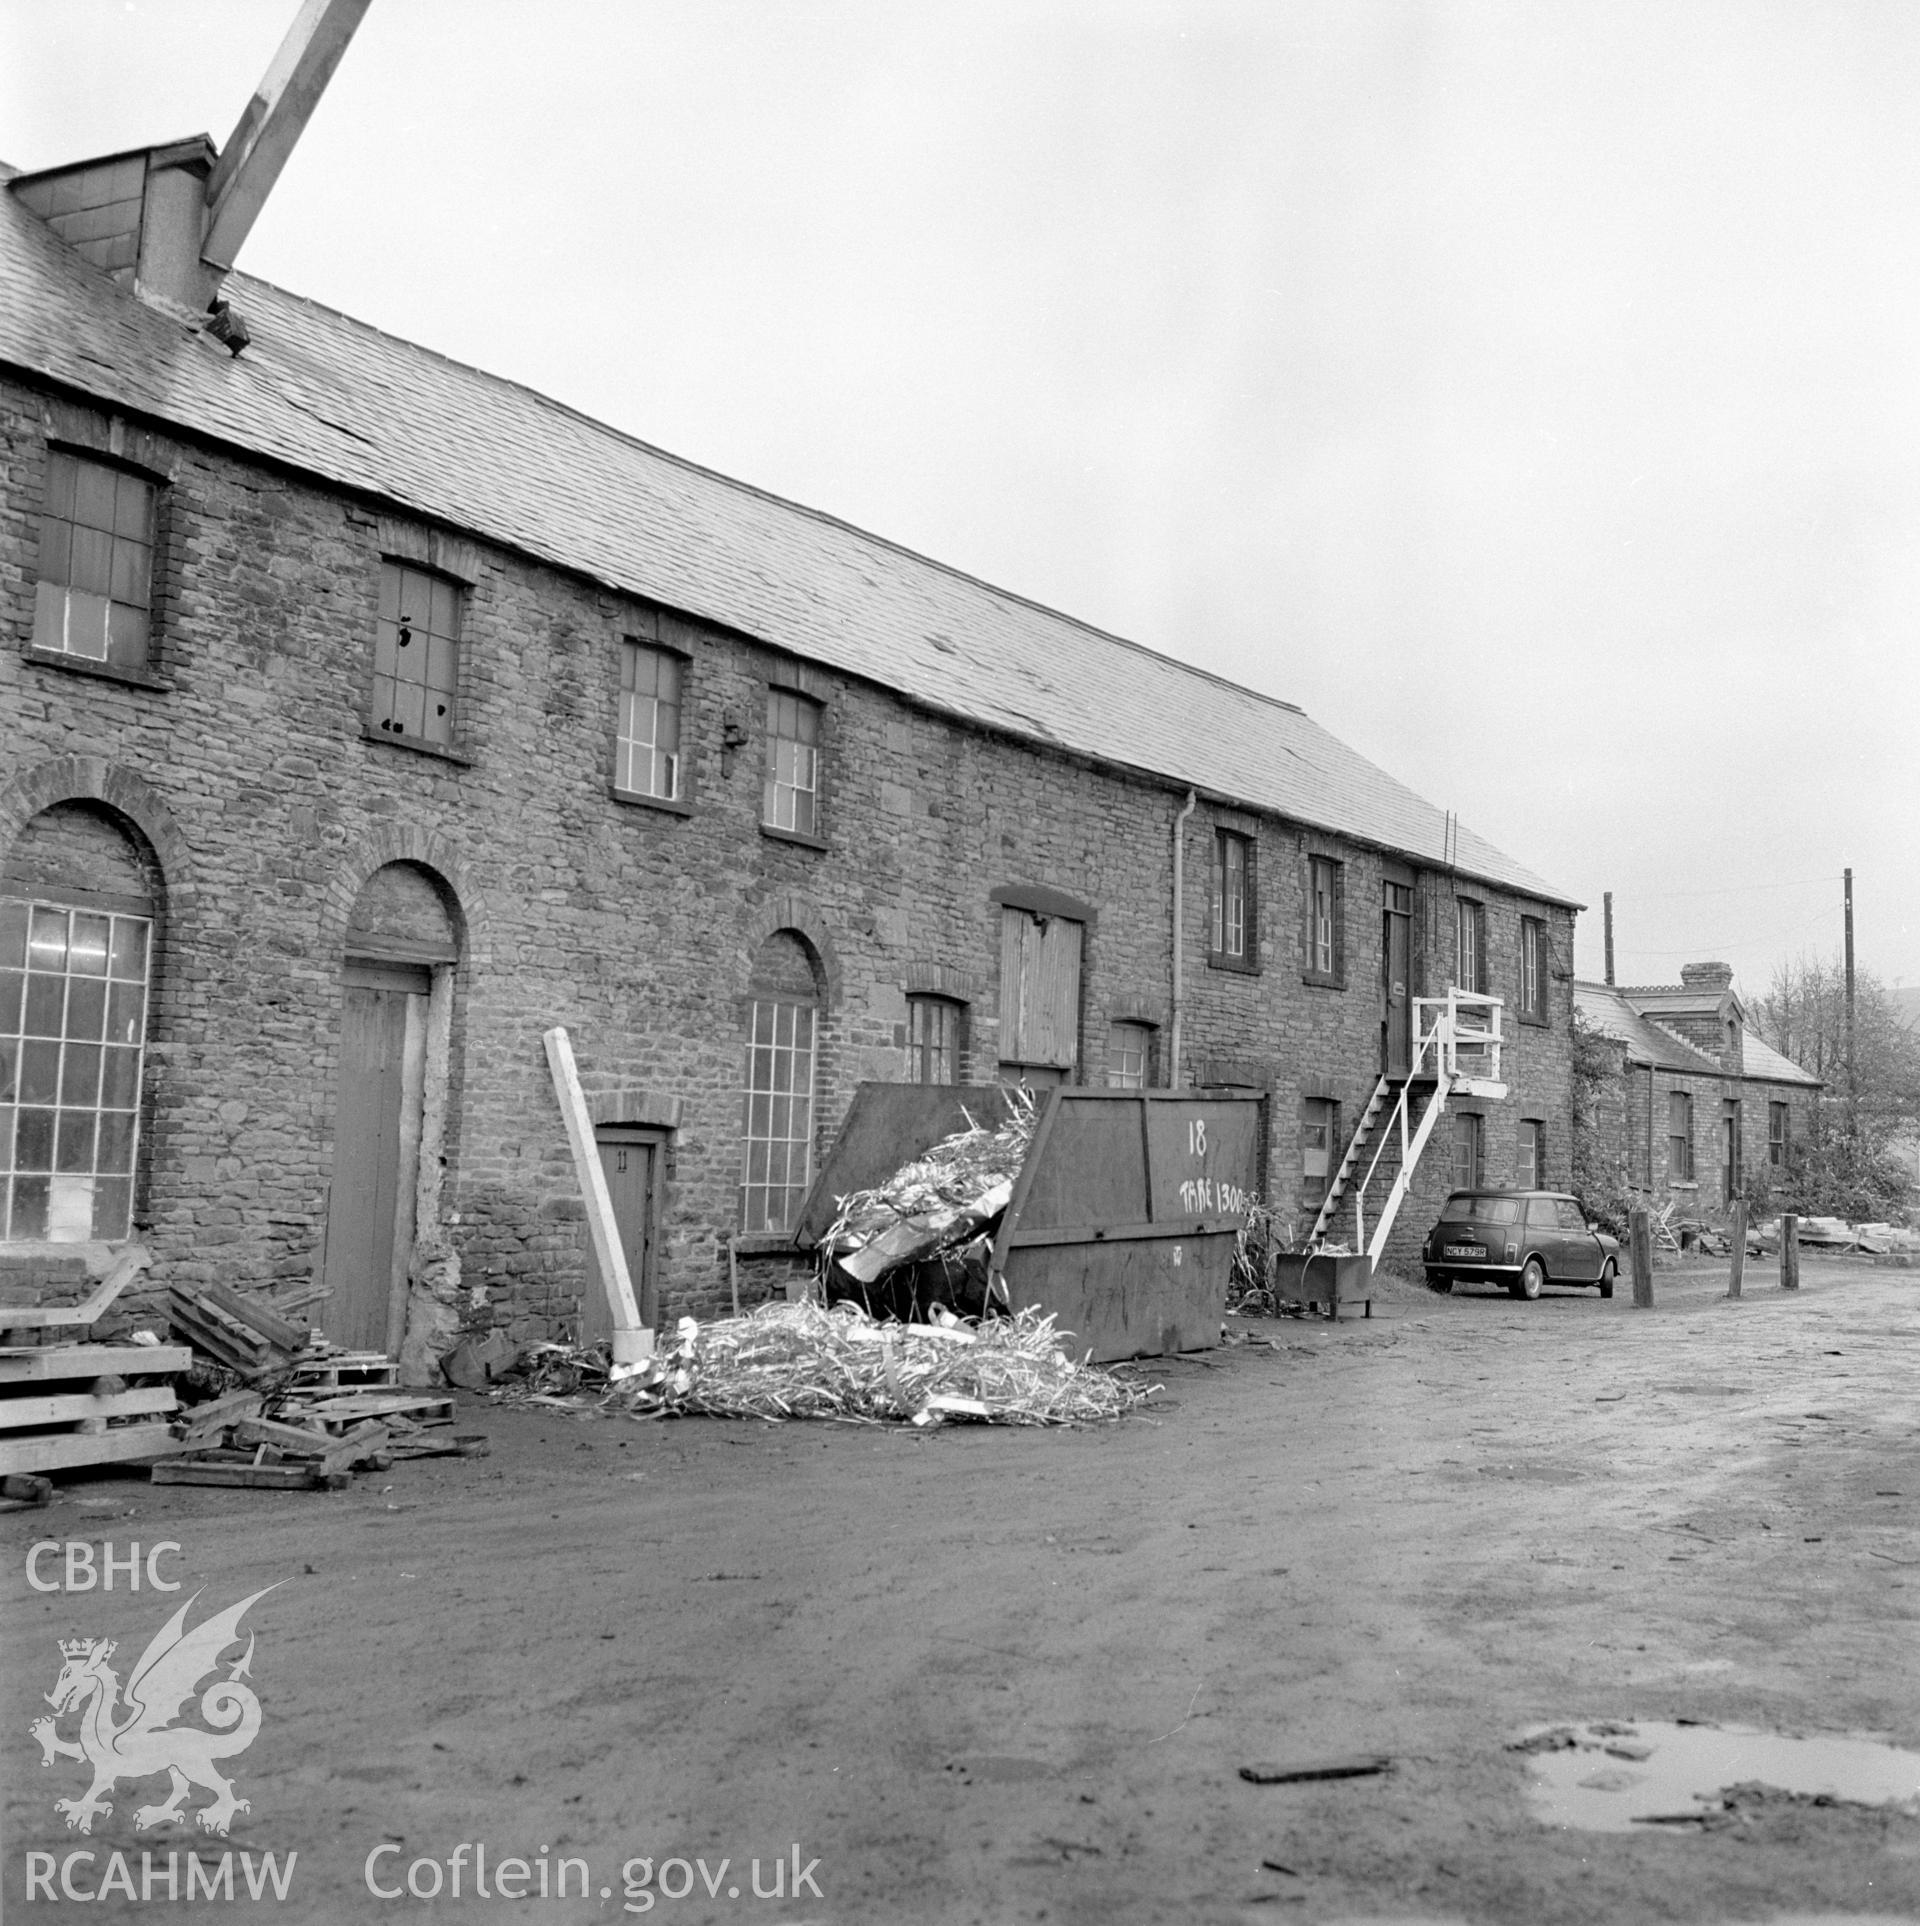 Digital copy of a black and white negative showing the building housing the crane at Player's Works Foundry, Clydach, taken by RCAHMW, undated